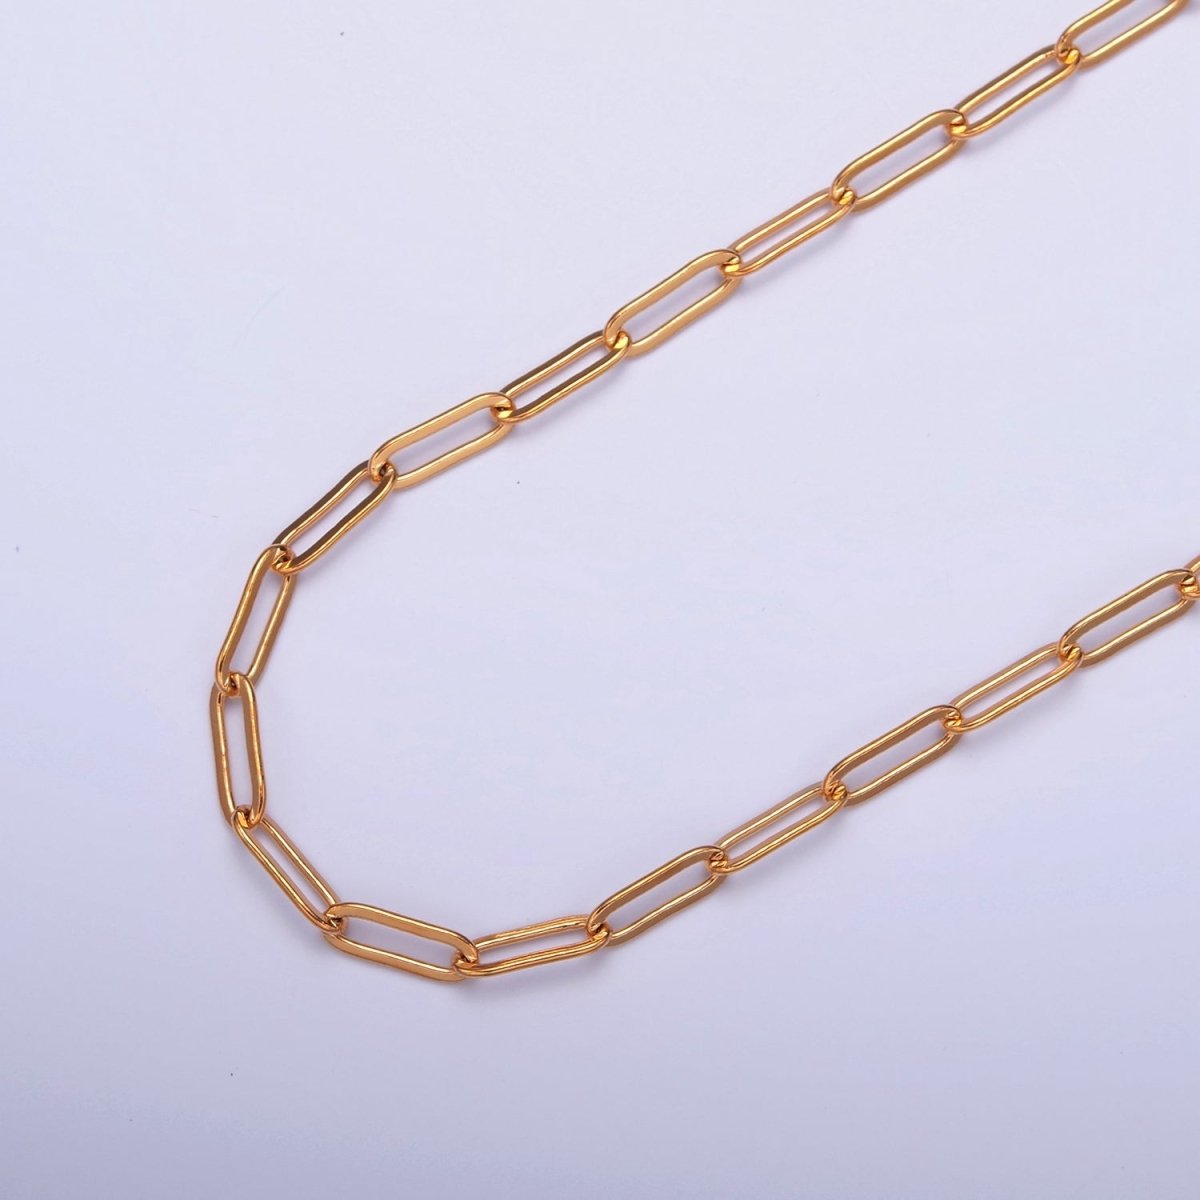 PaperClip Unfinished Chain, 9mm x 3.2mm, 24k Gold Filled Chain 19.5 inch long | WA-1387 Clearance Pricing - DLUXCA